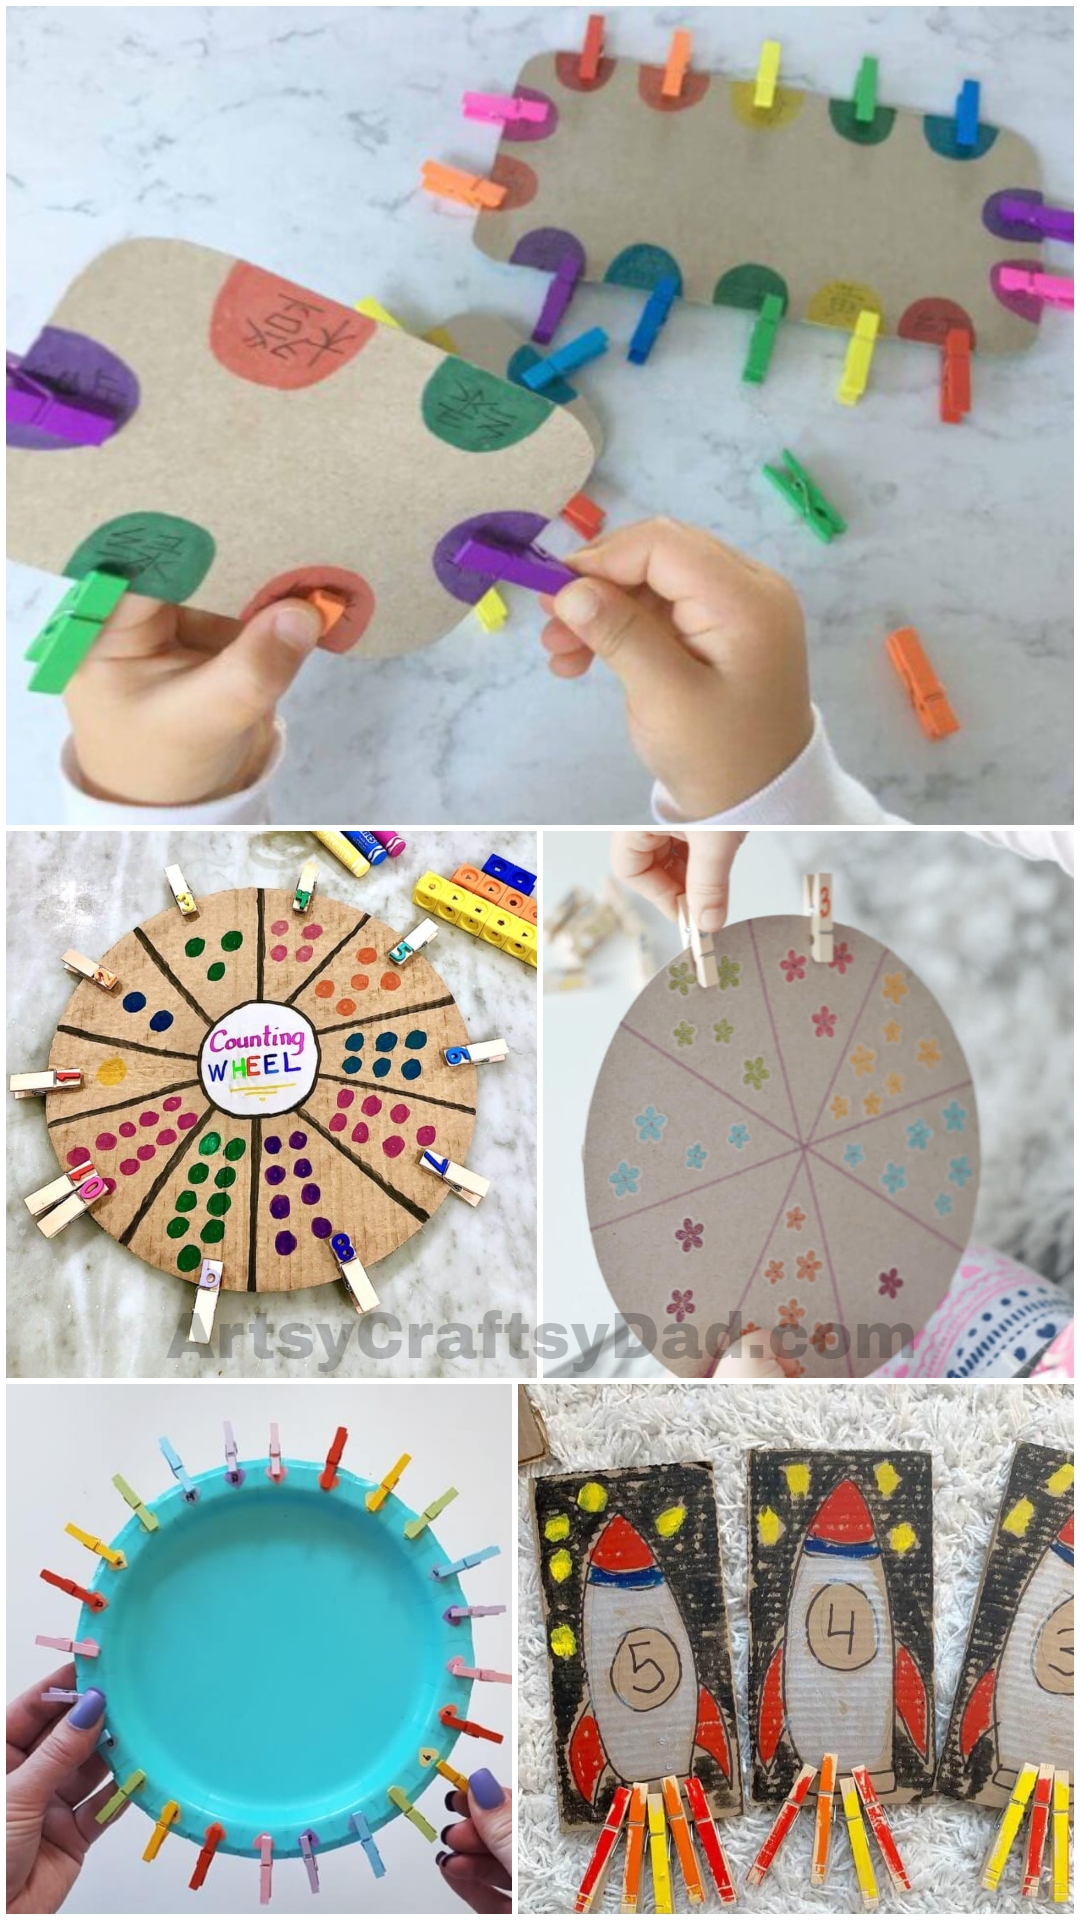 Learning with DIY Clothespins